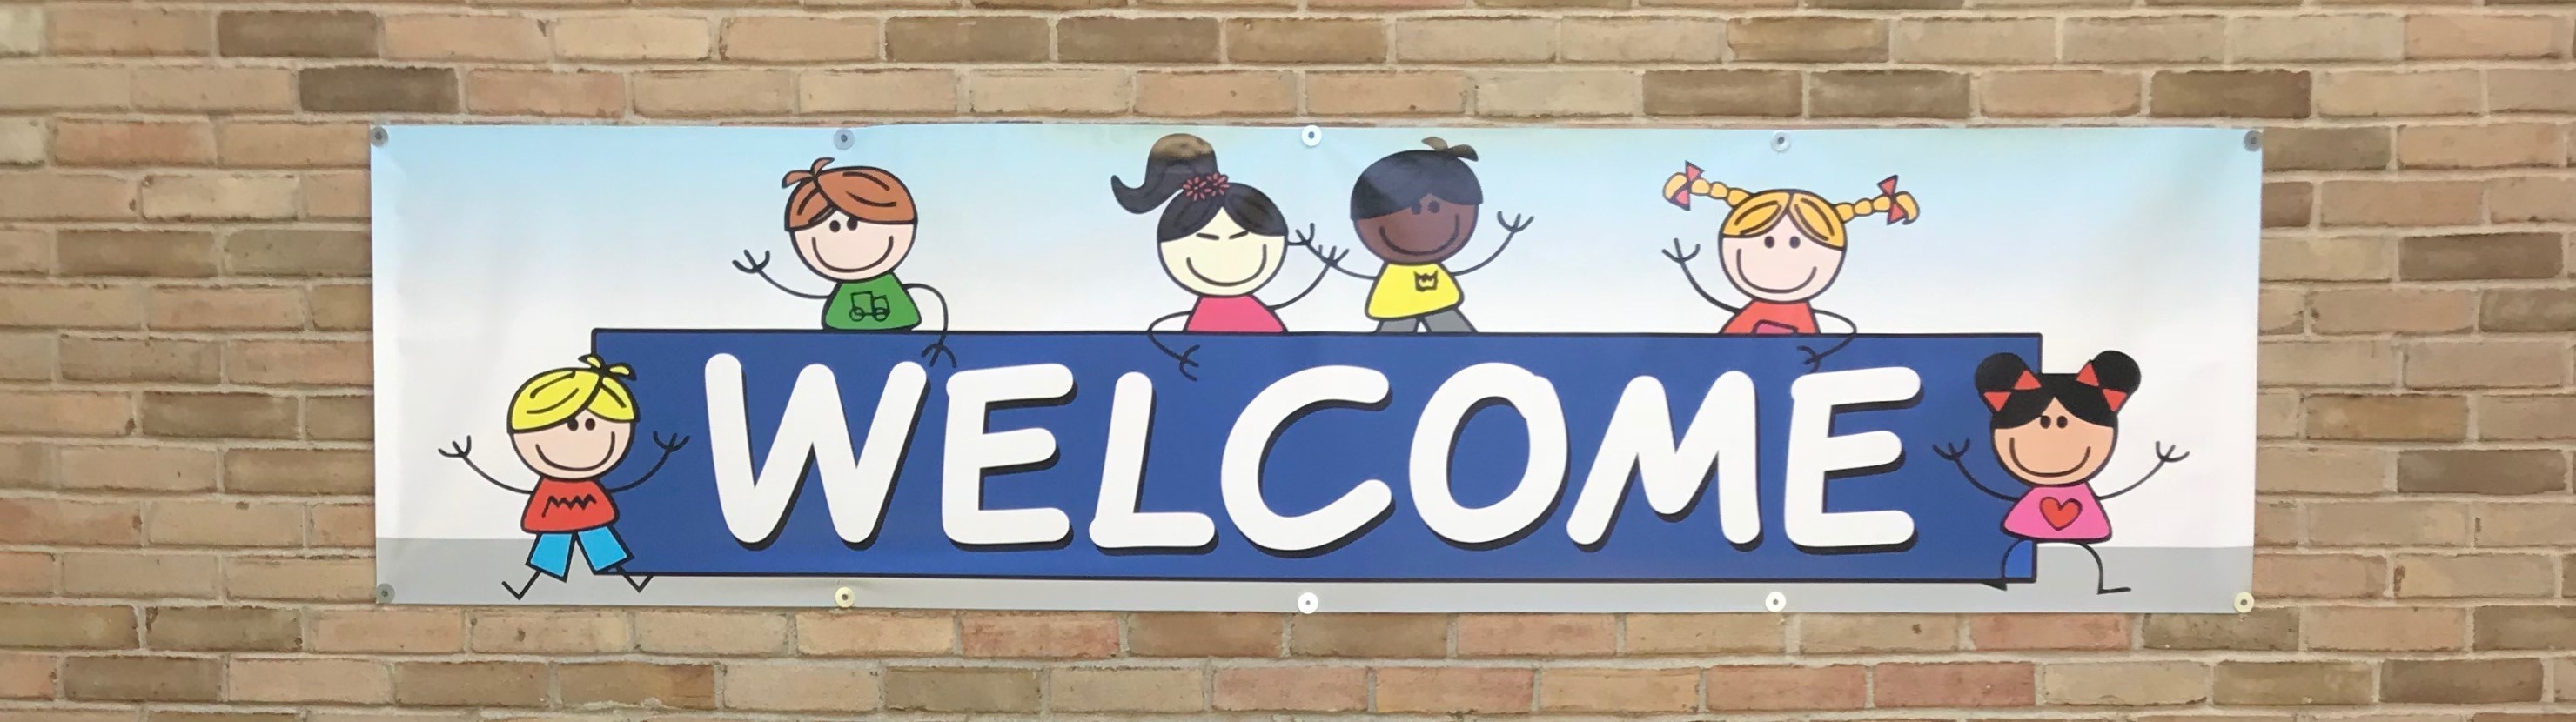 Welcome Sign at the front entrance